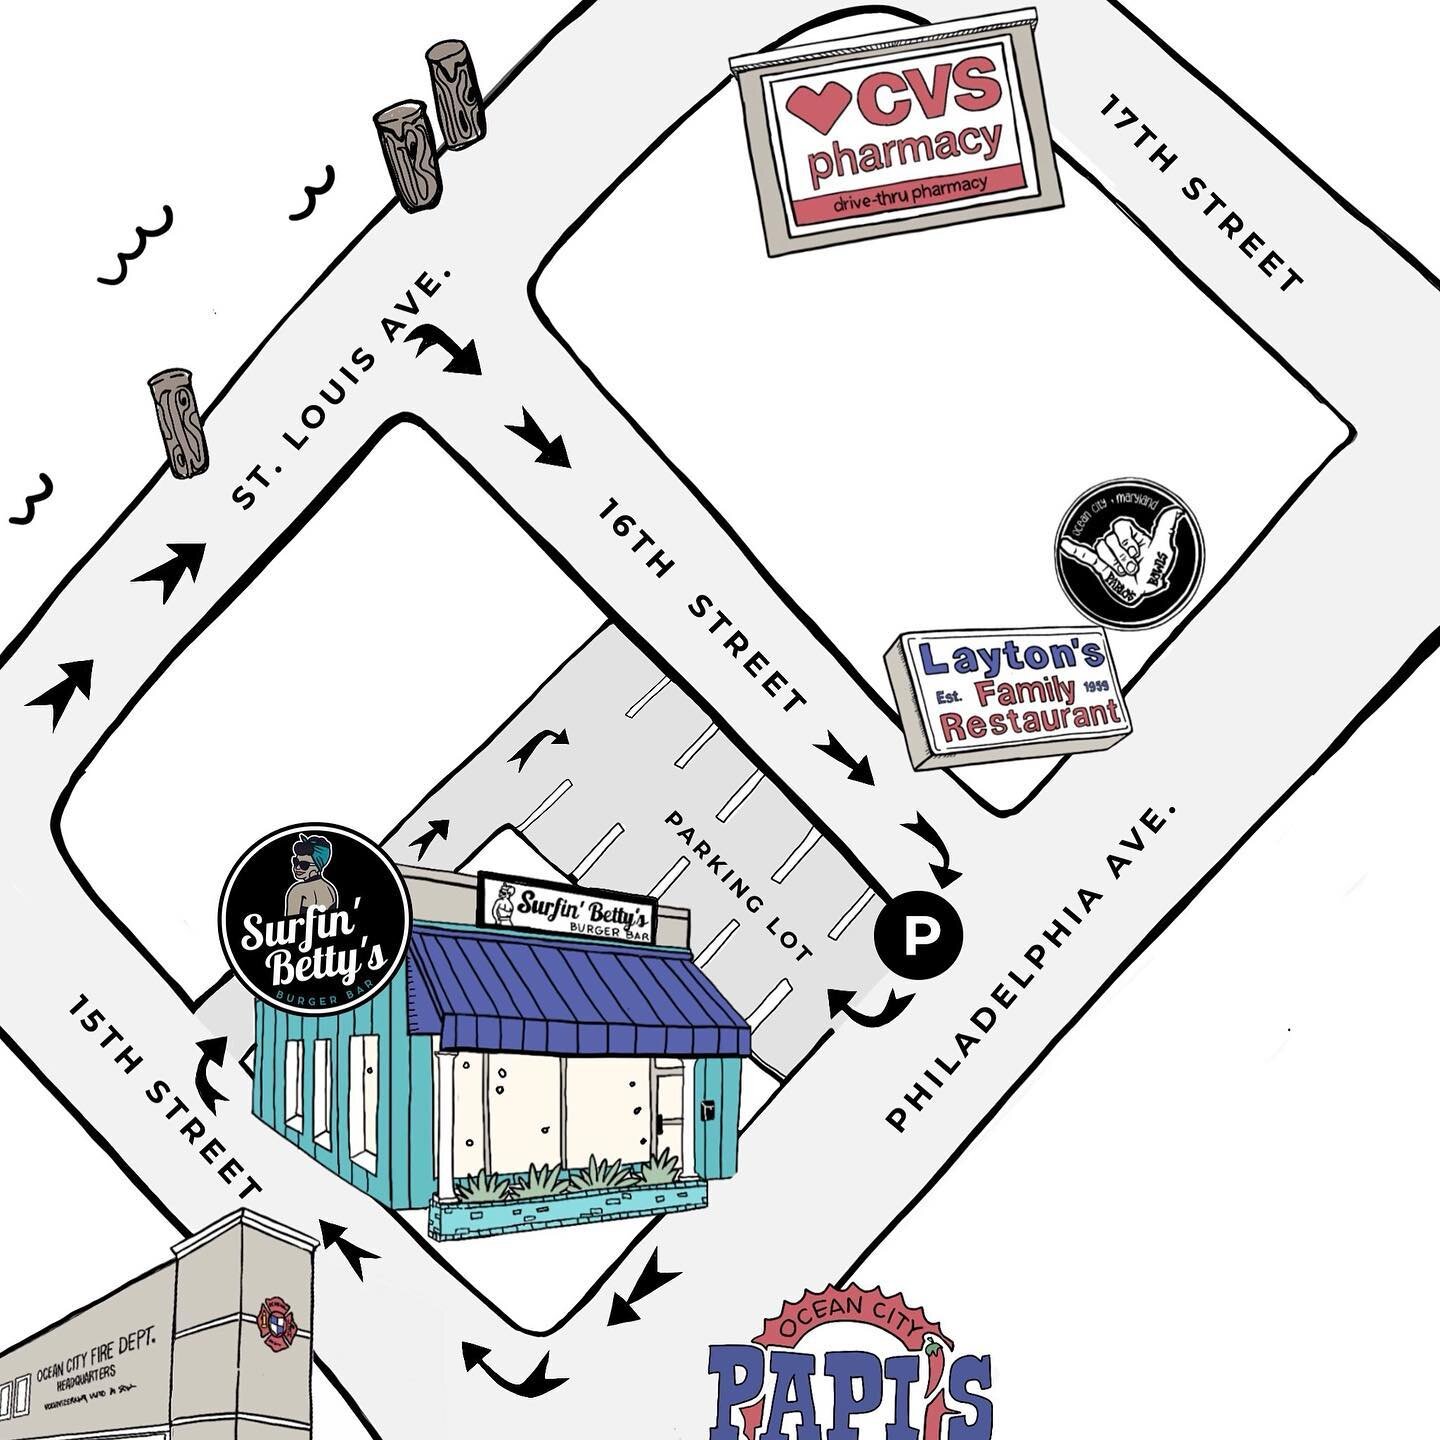 We&rsquo;ve been getting a lot of questions about where we are located, so here&rsquo;s a quick map of us and surrounding businesses! Aside from street parking and bike rack, there is a parking lot located just north of the strip mall for your conven